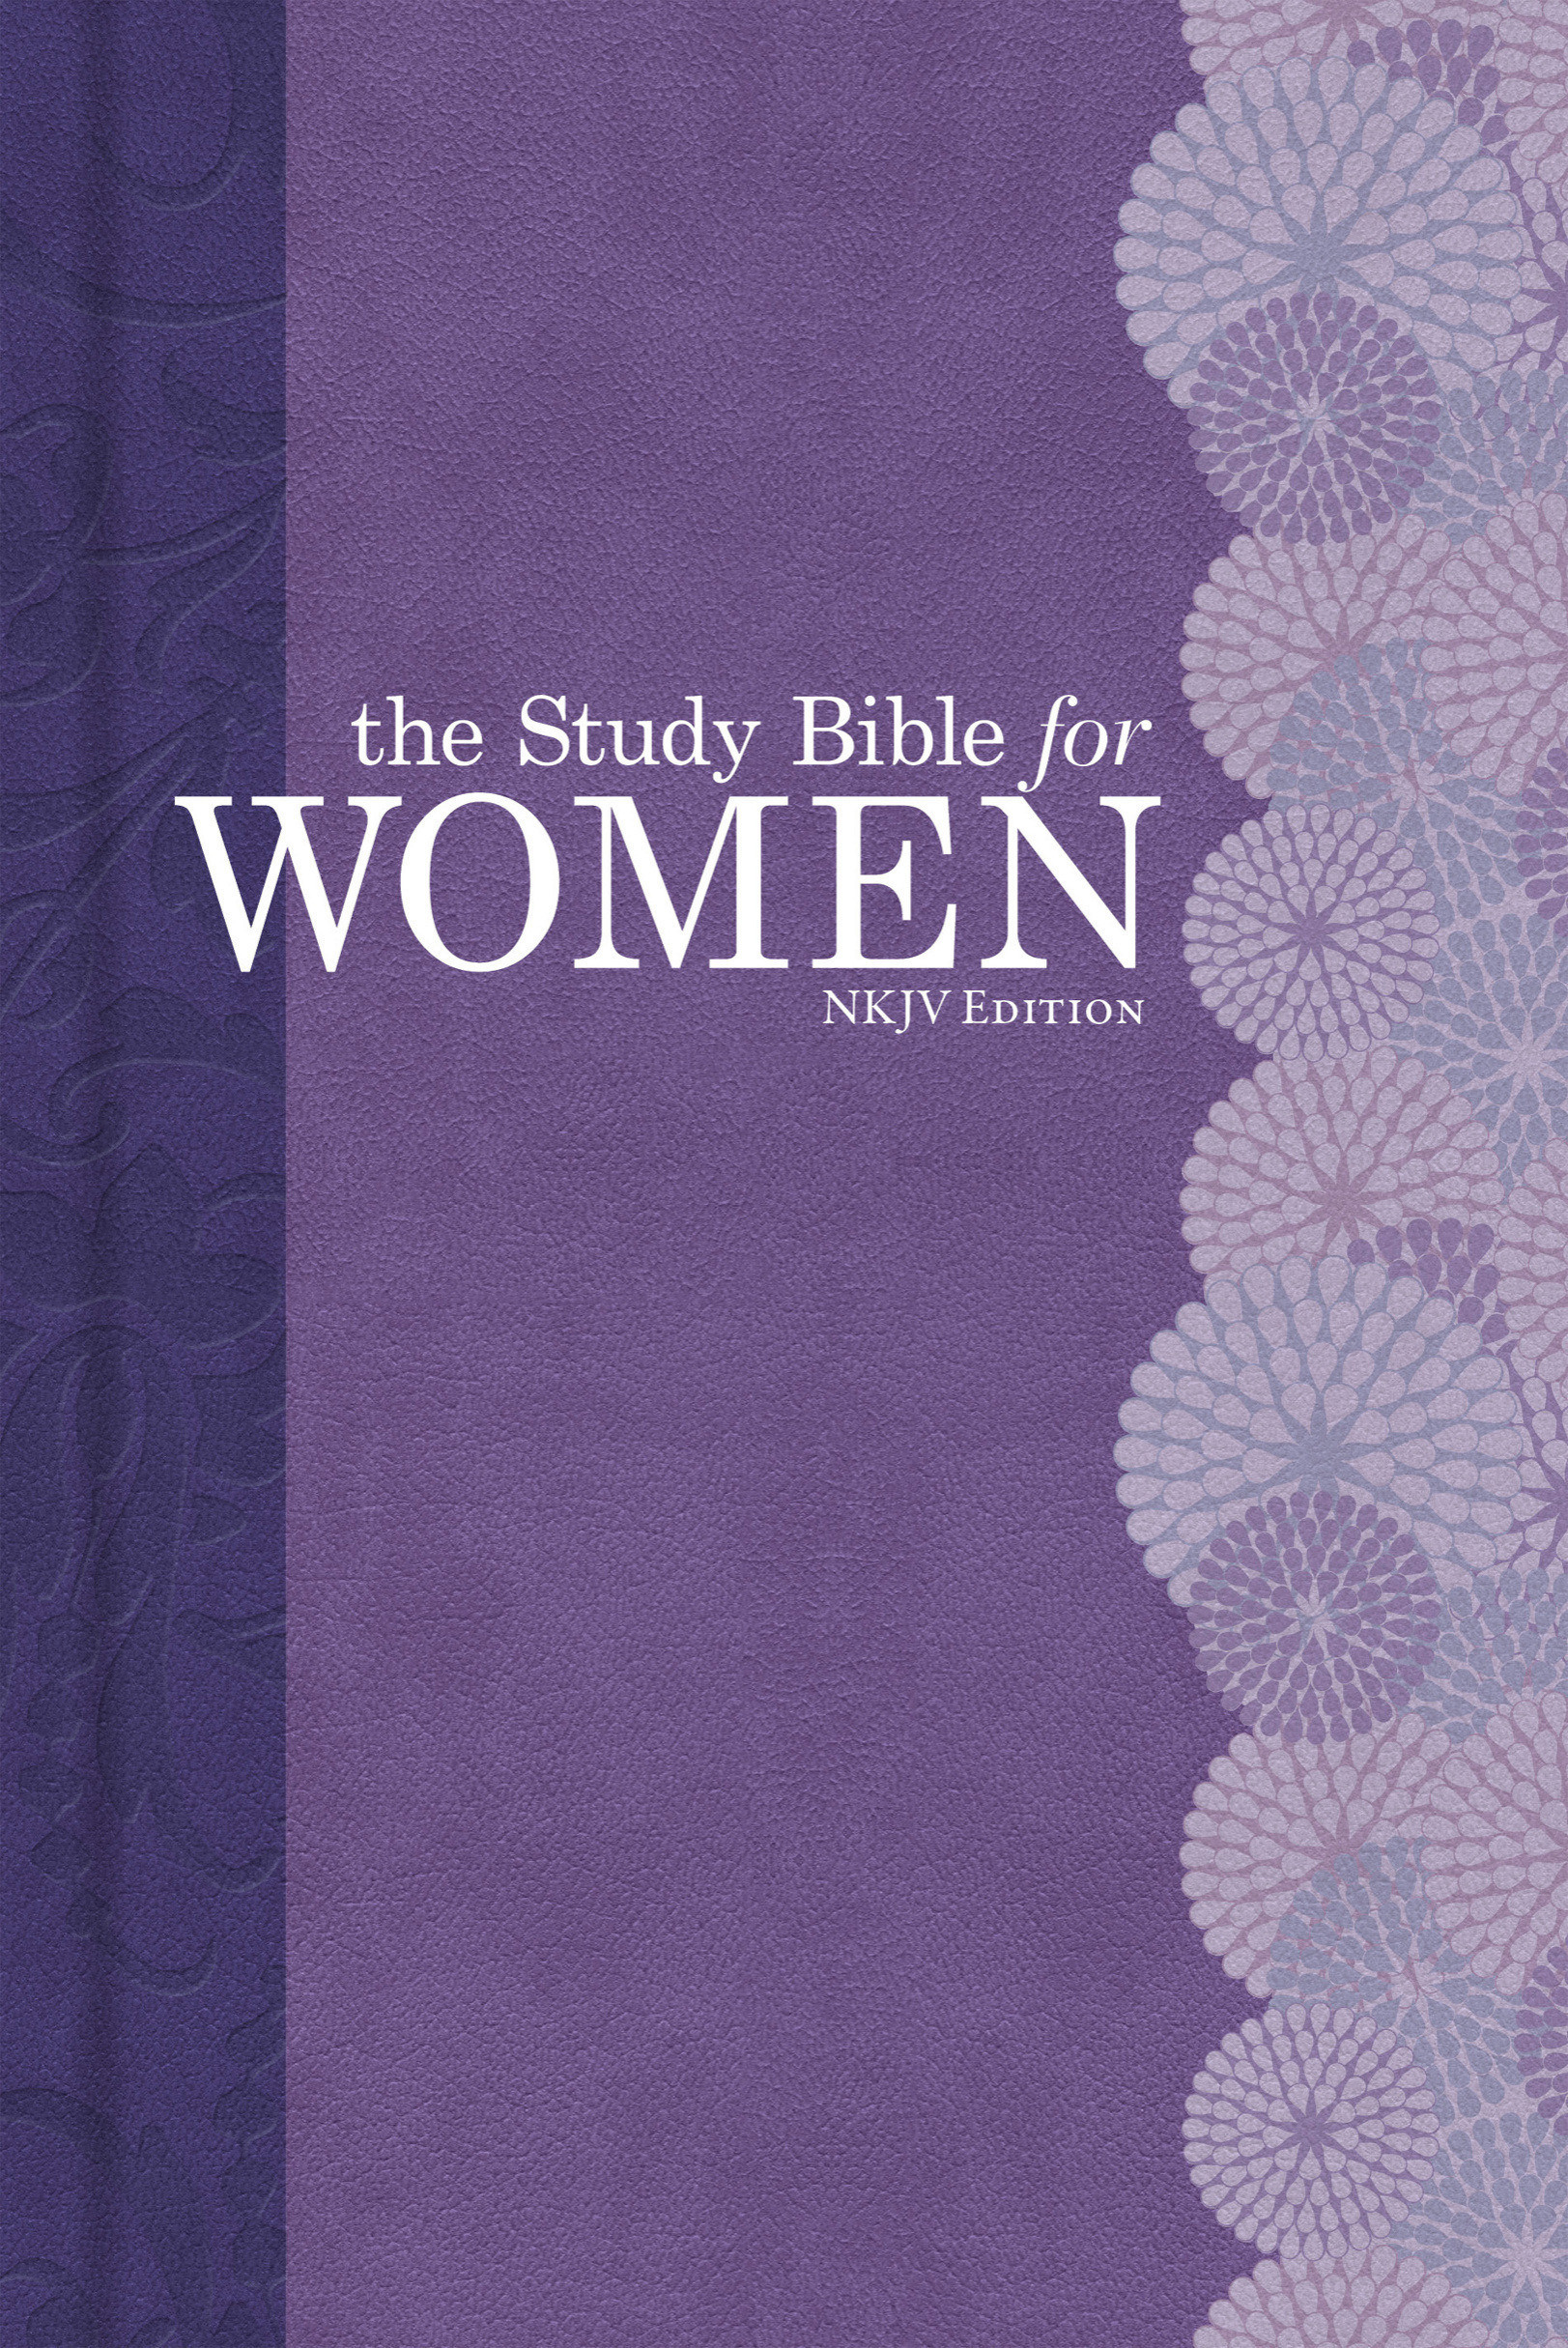 NKJV Study Bible For Women, Personal Size Edition Hardco, Th